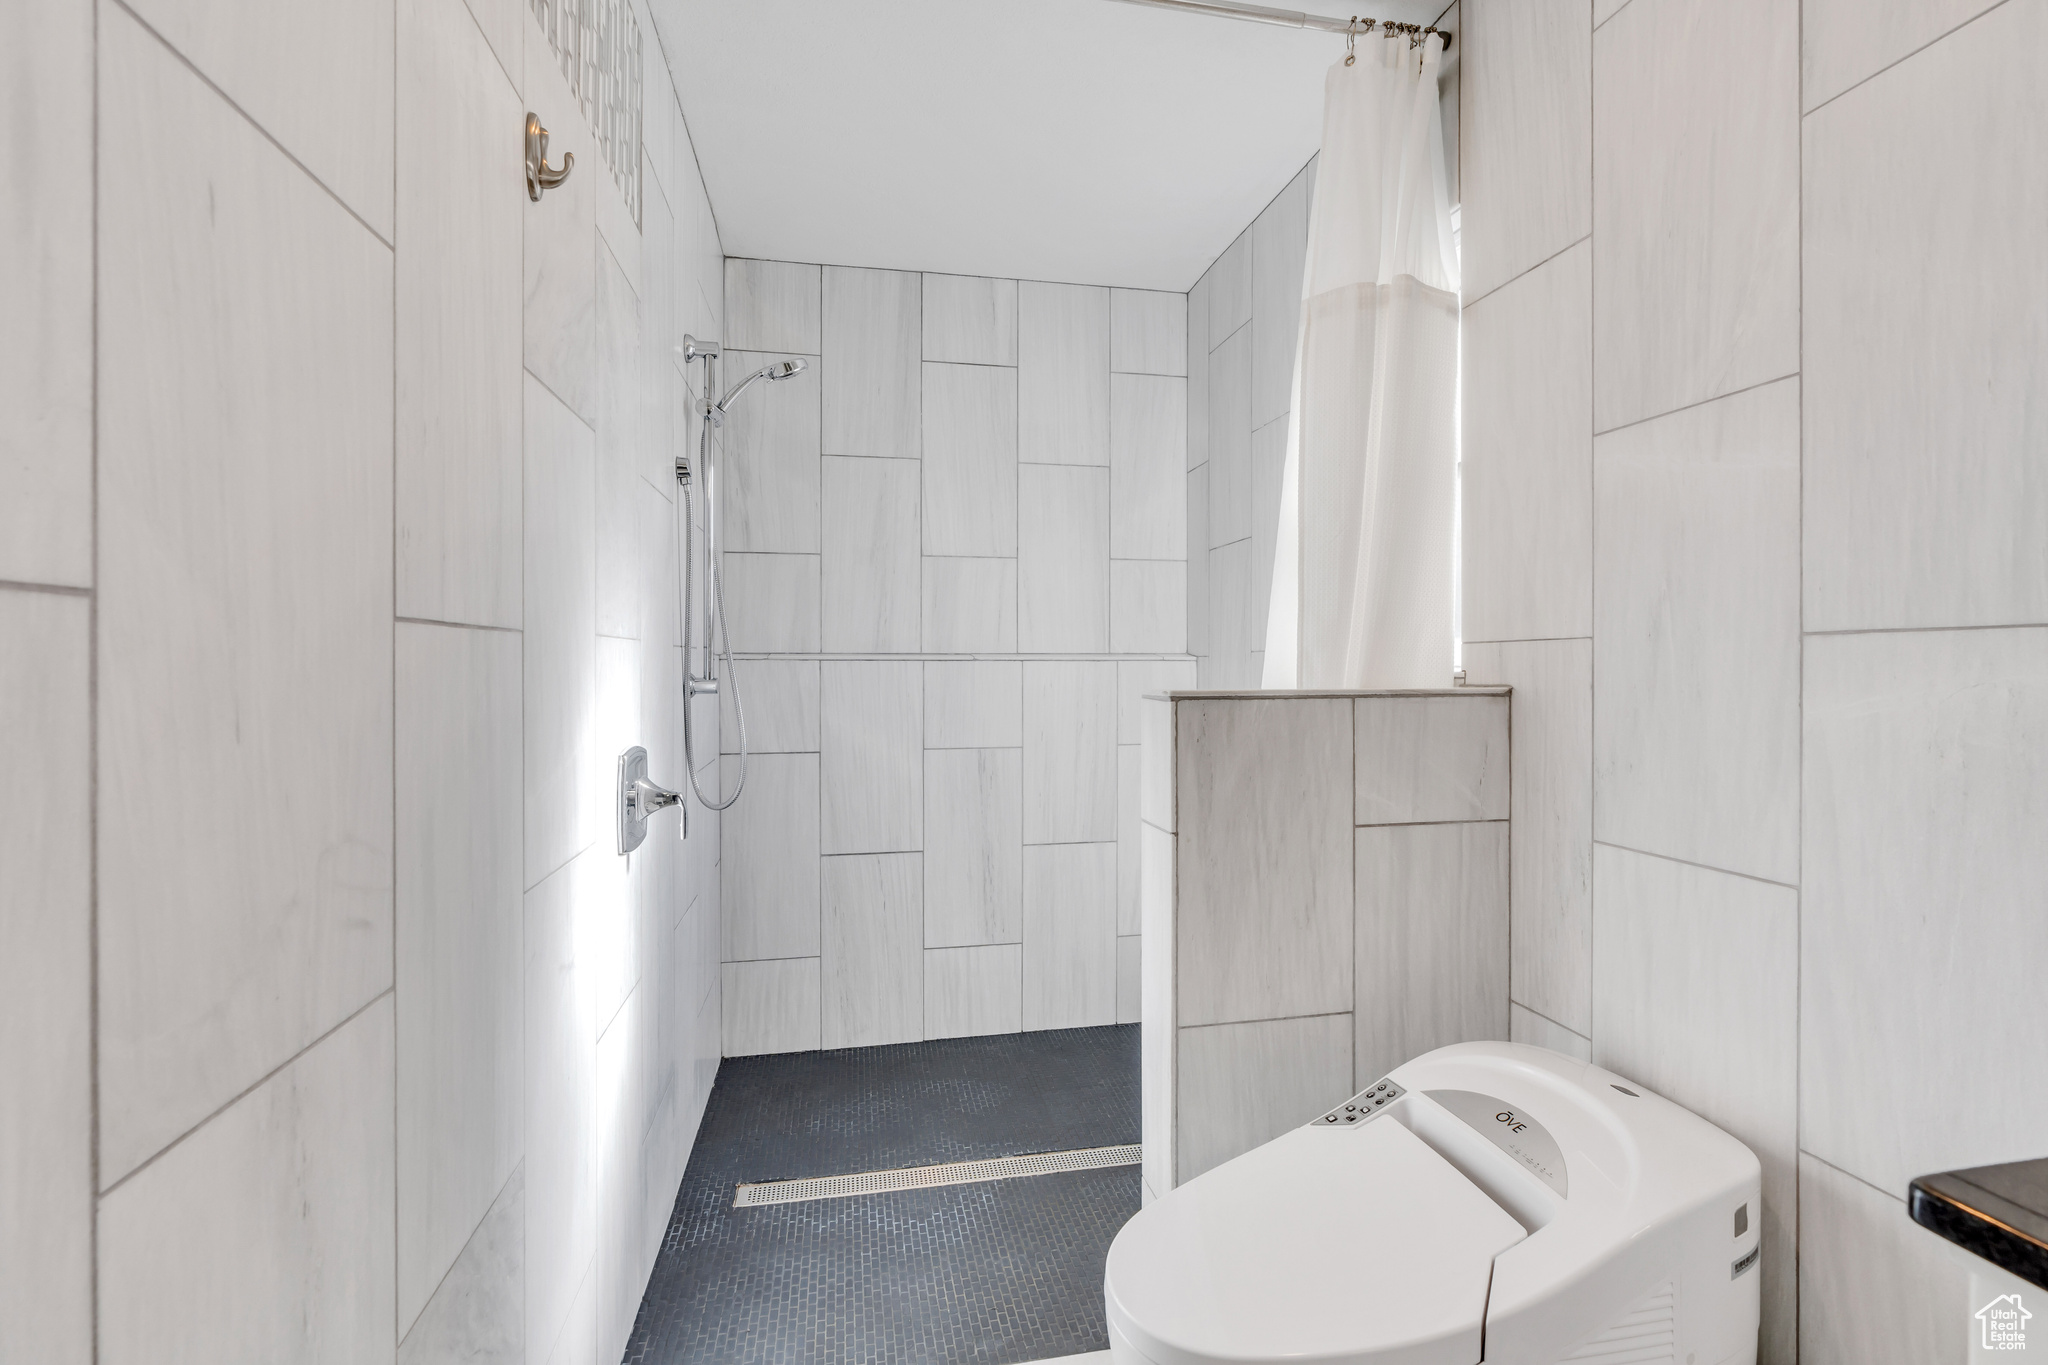 Bathroom featuring toilet, tile walls, and a shower with curtain